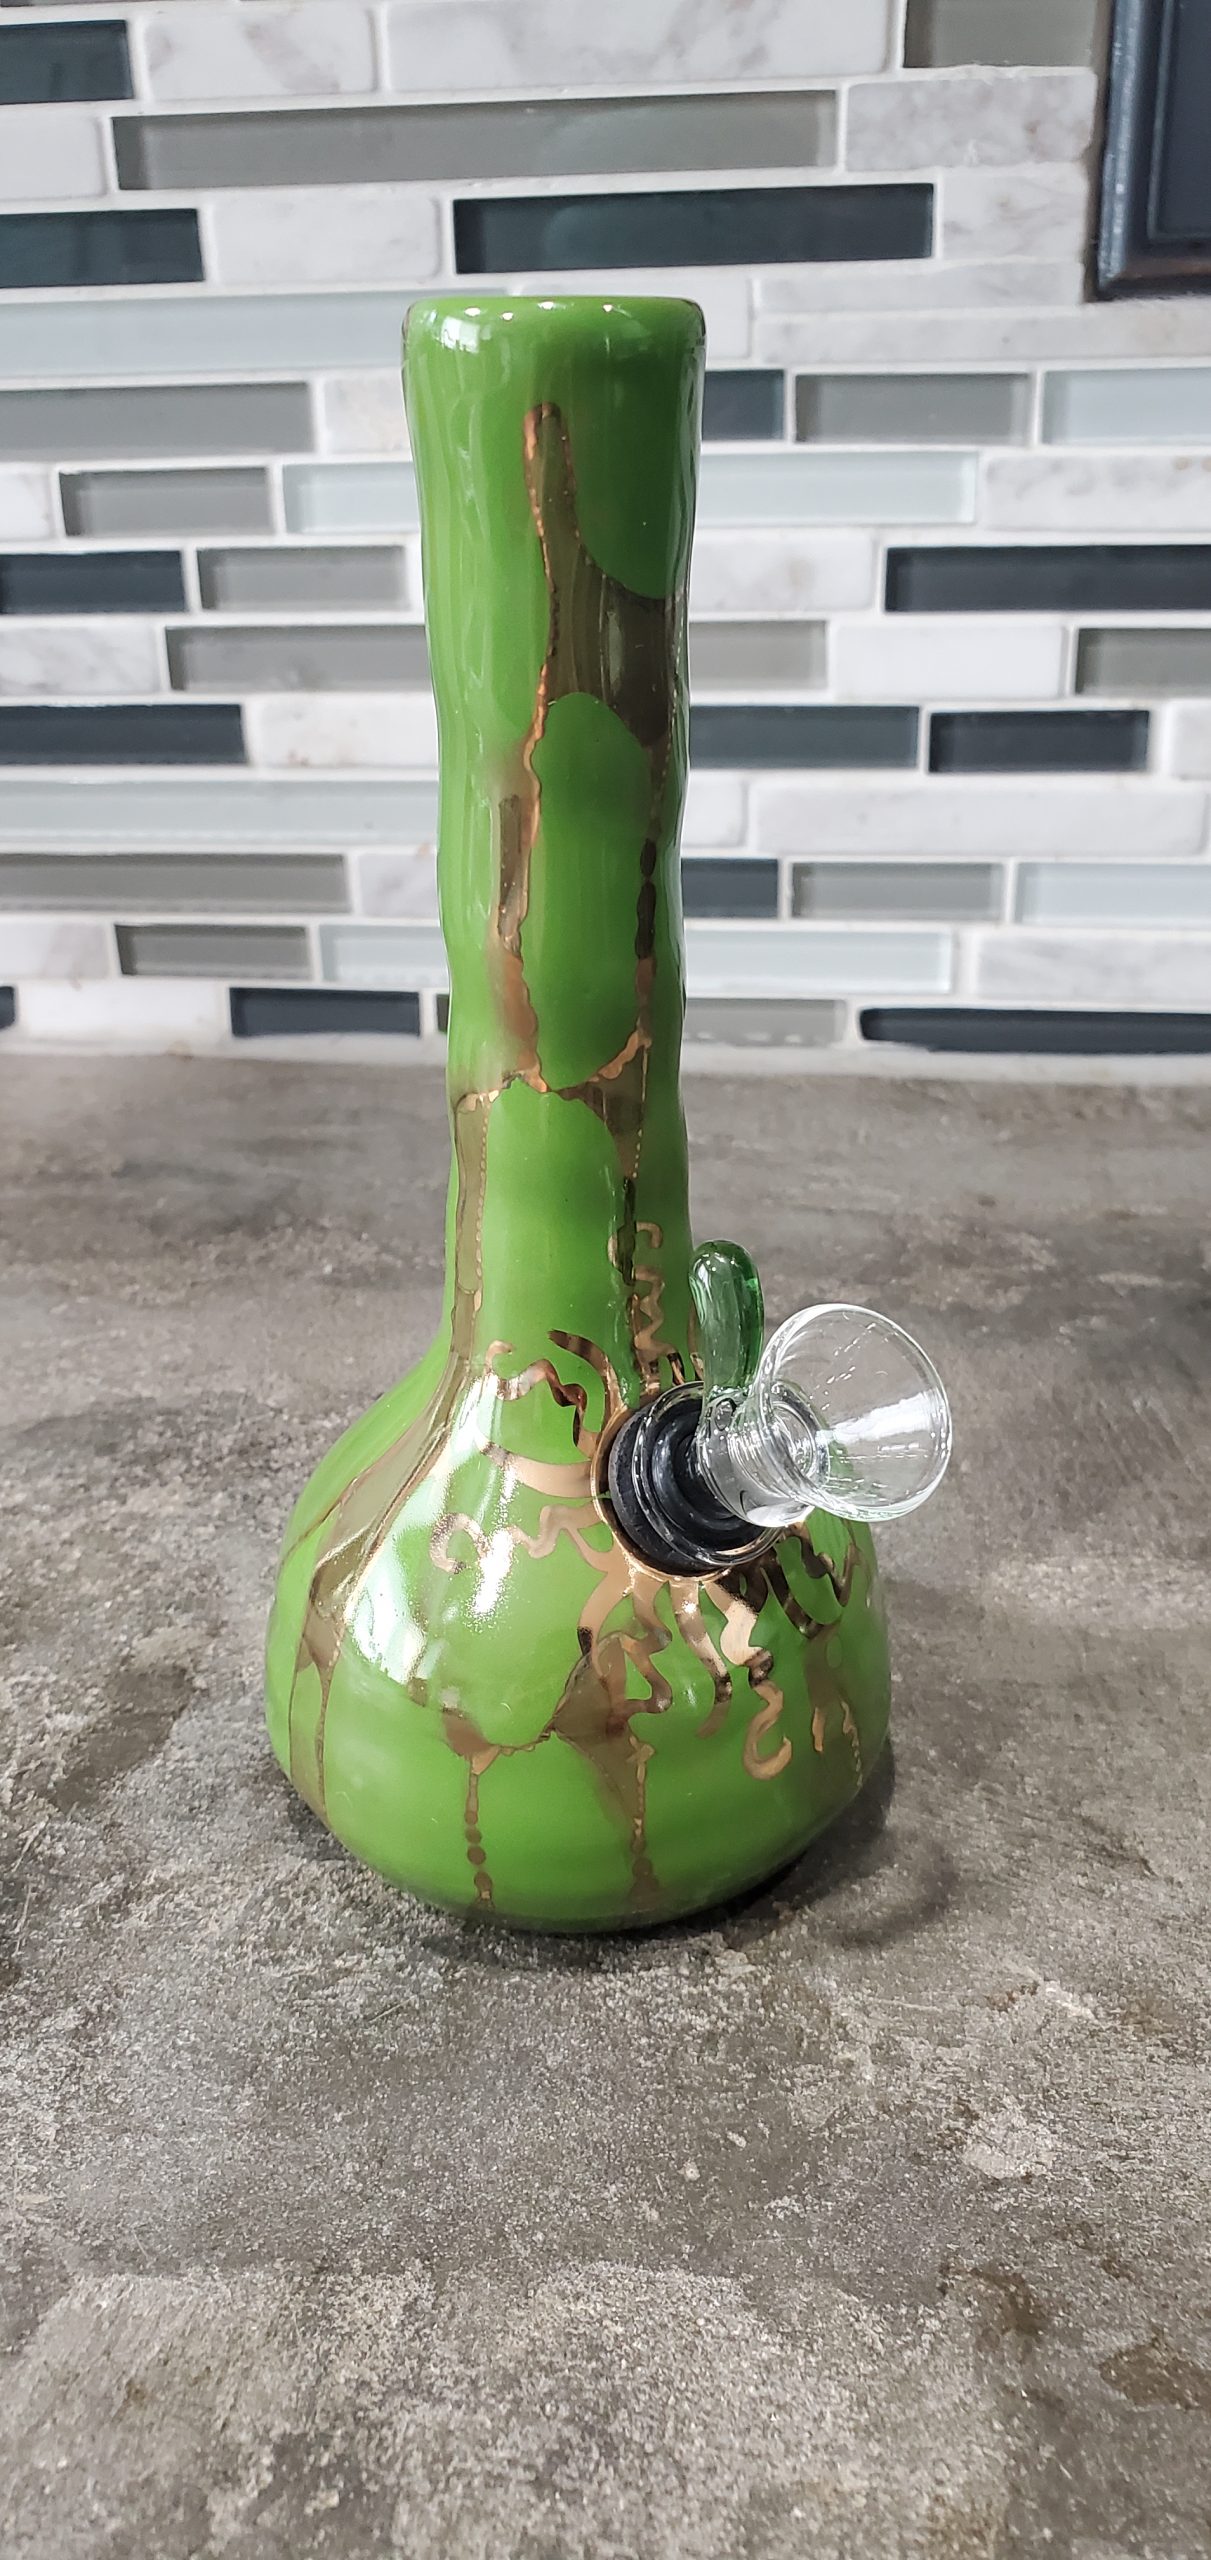 Medible review Ancient Creations bong 1 scaled